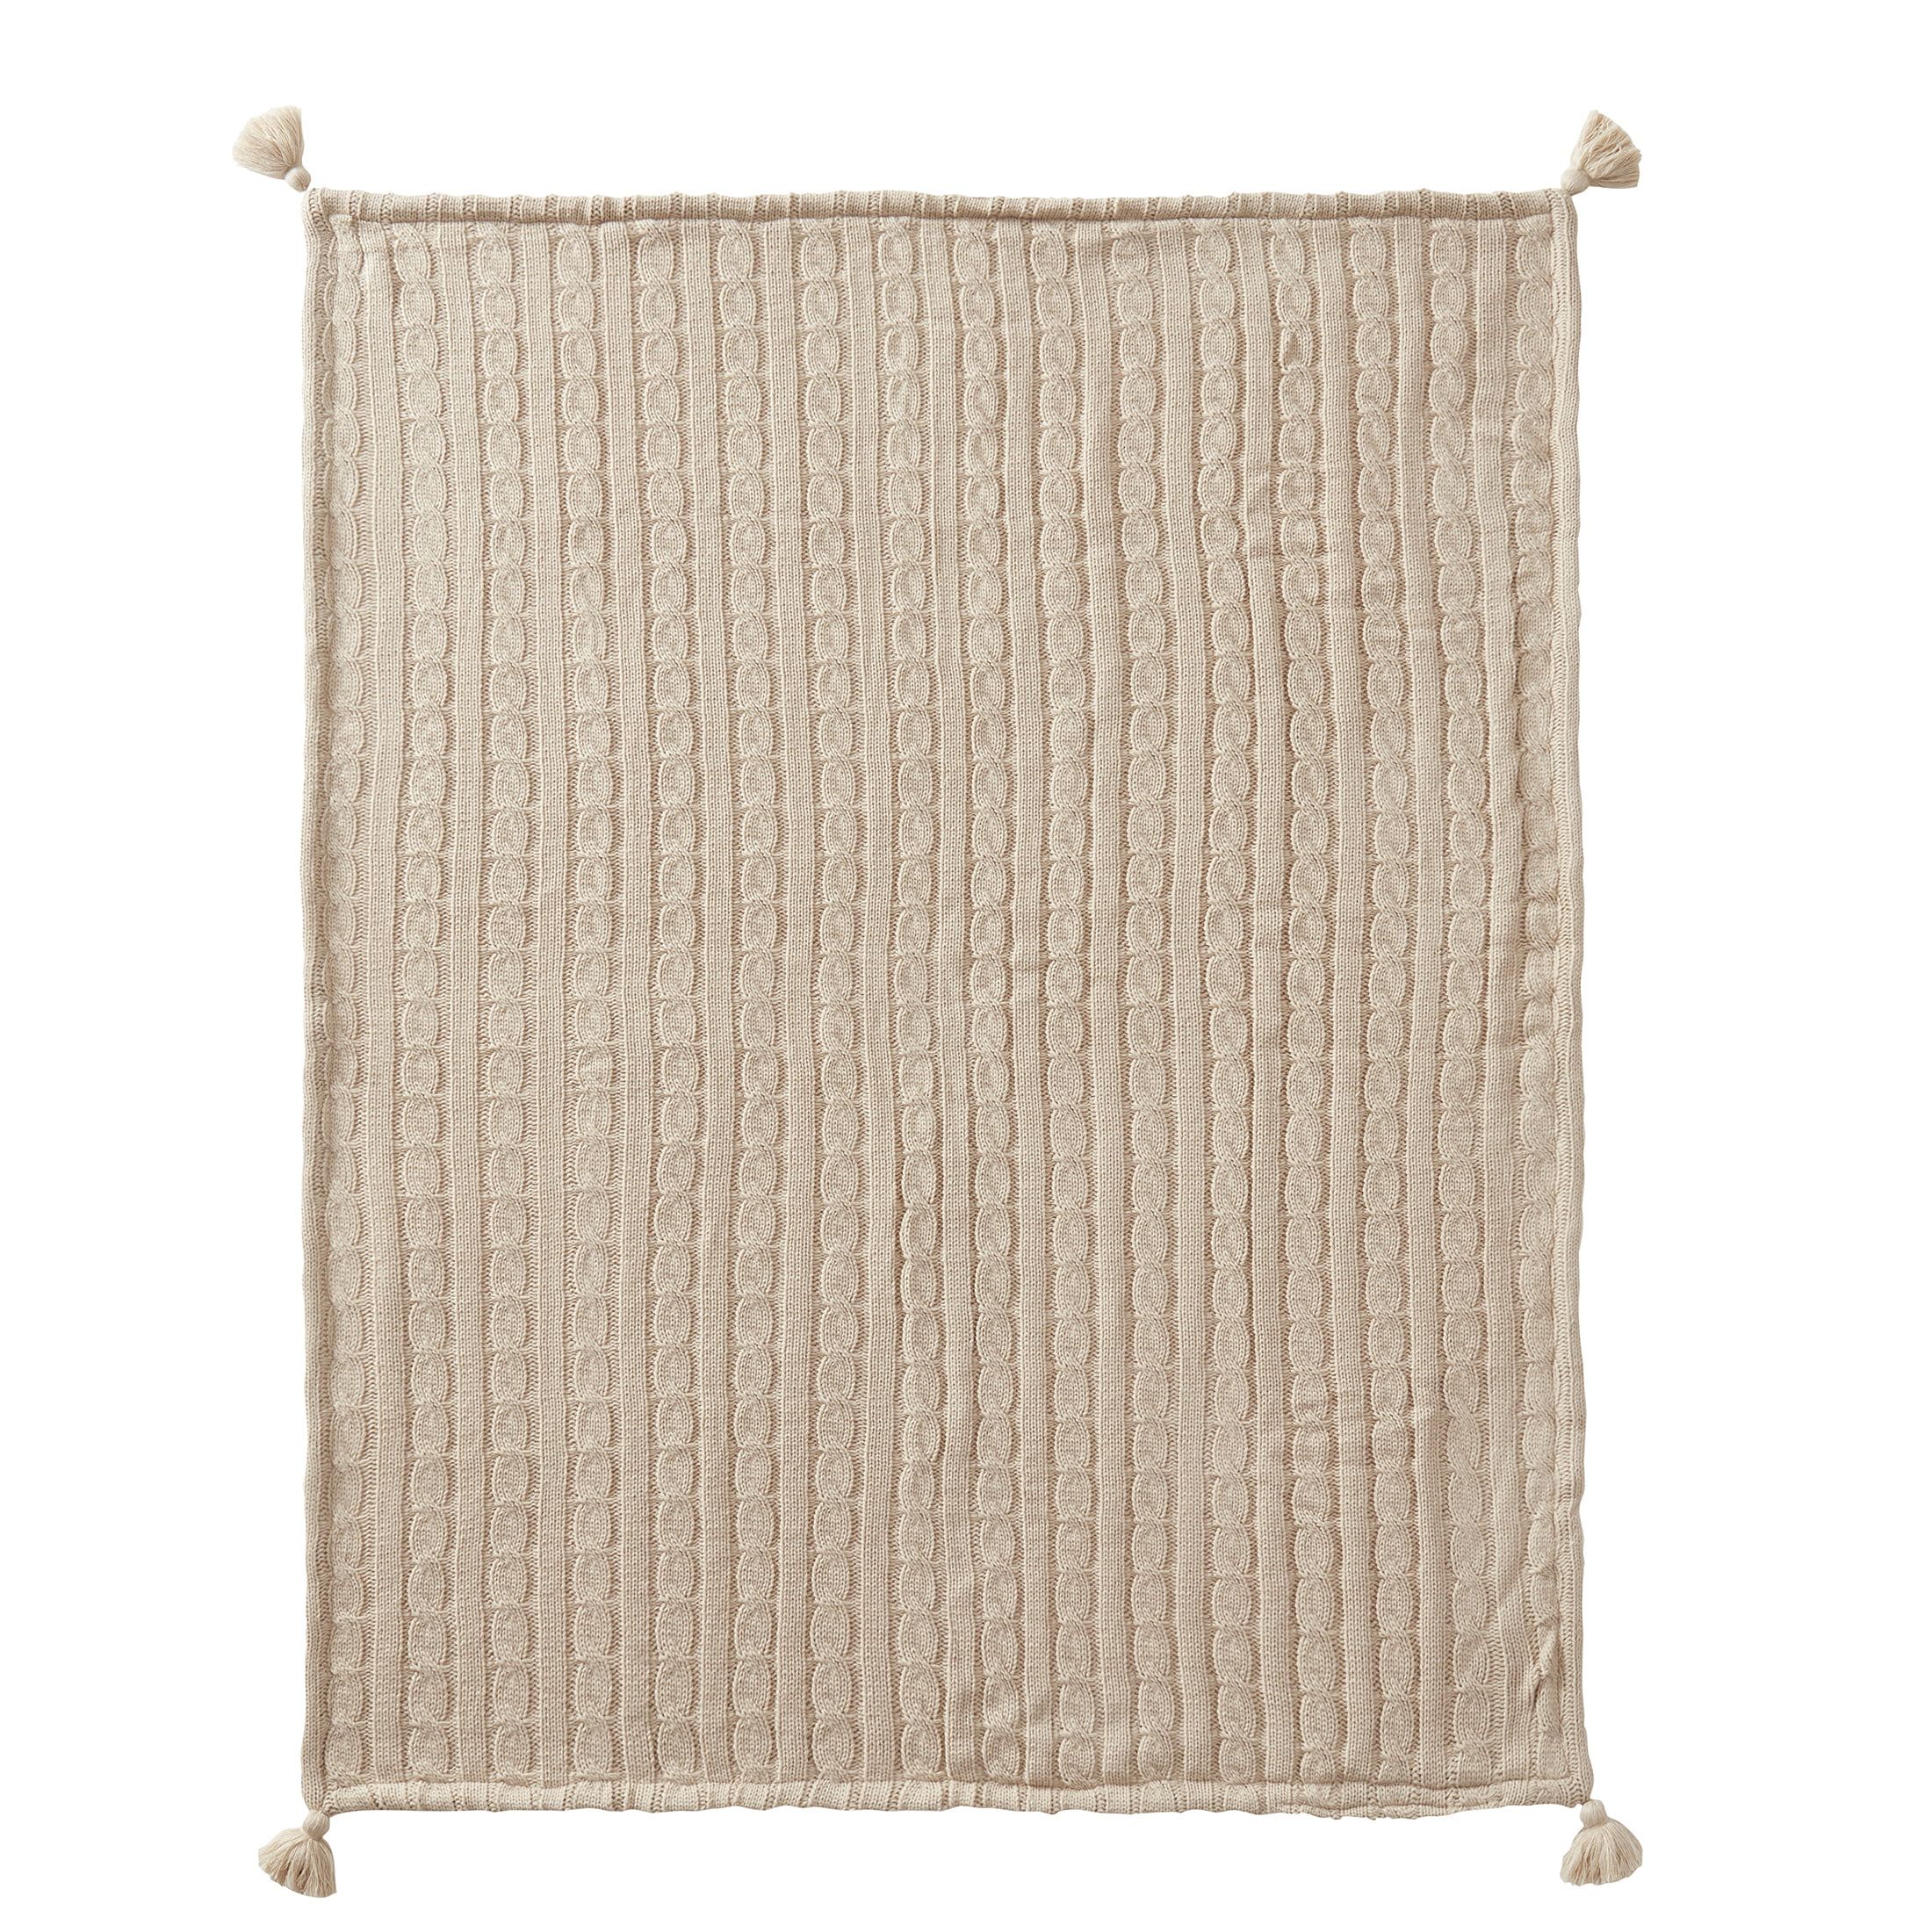 My Texas House Reece Sherpa Cable Knit Throw, 50" x 60", Brown Rice | Walmart (US)